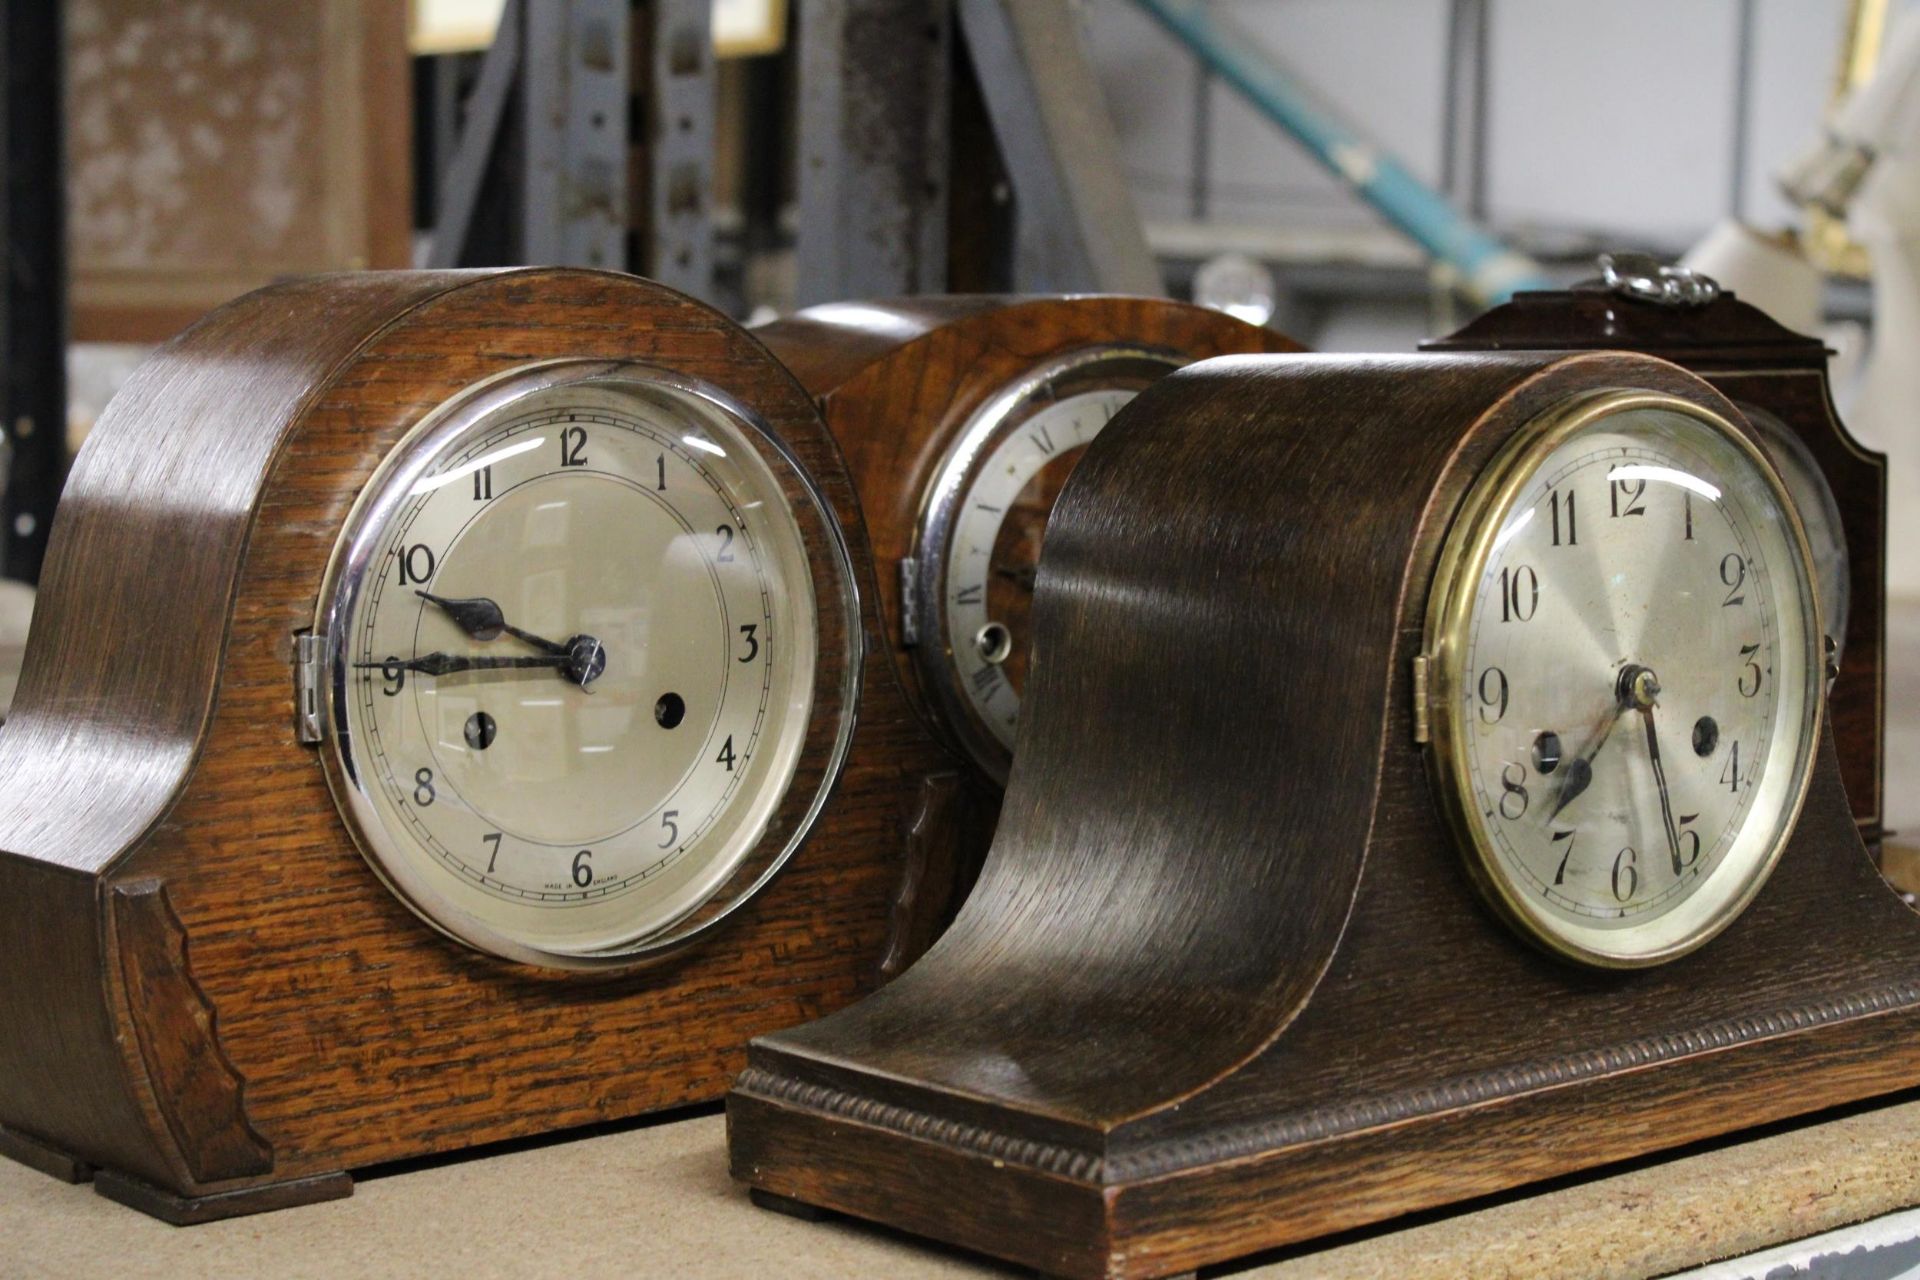 FOUR VINTAGE MANTEL CLOCKS IN WOODEN CASES - Image 2 of 6